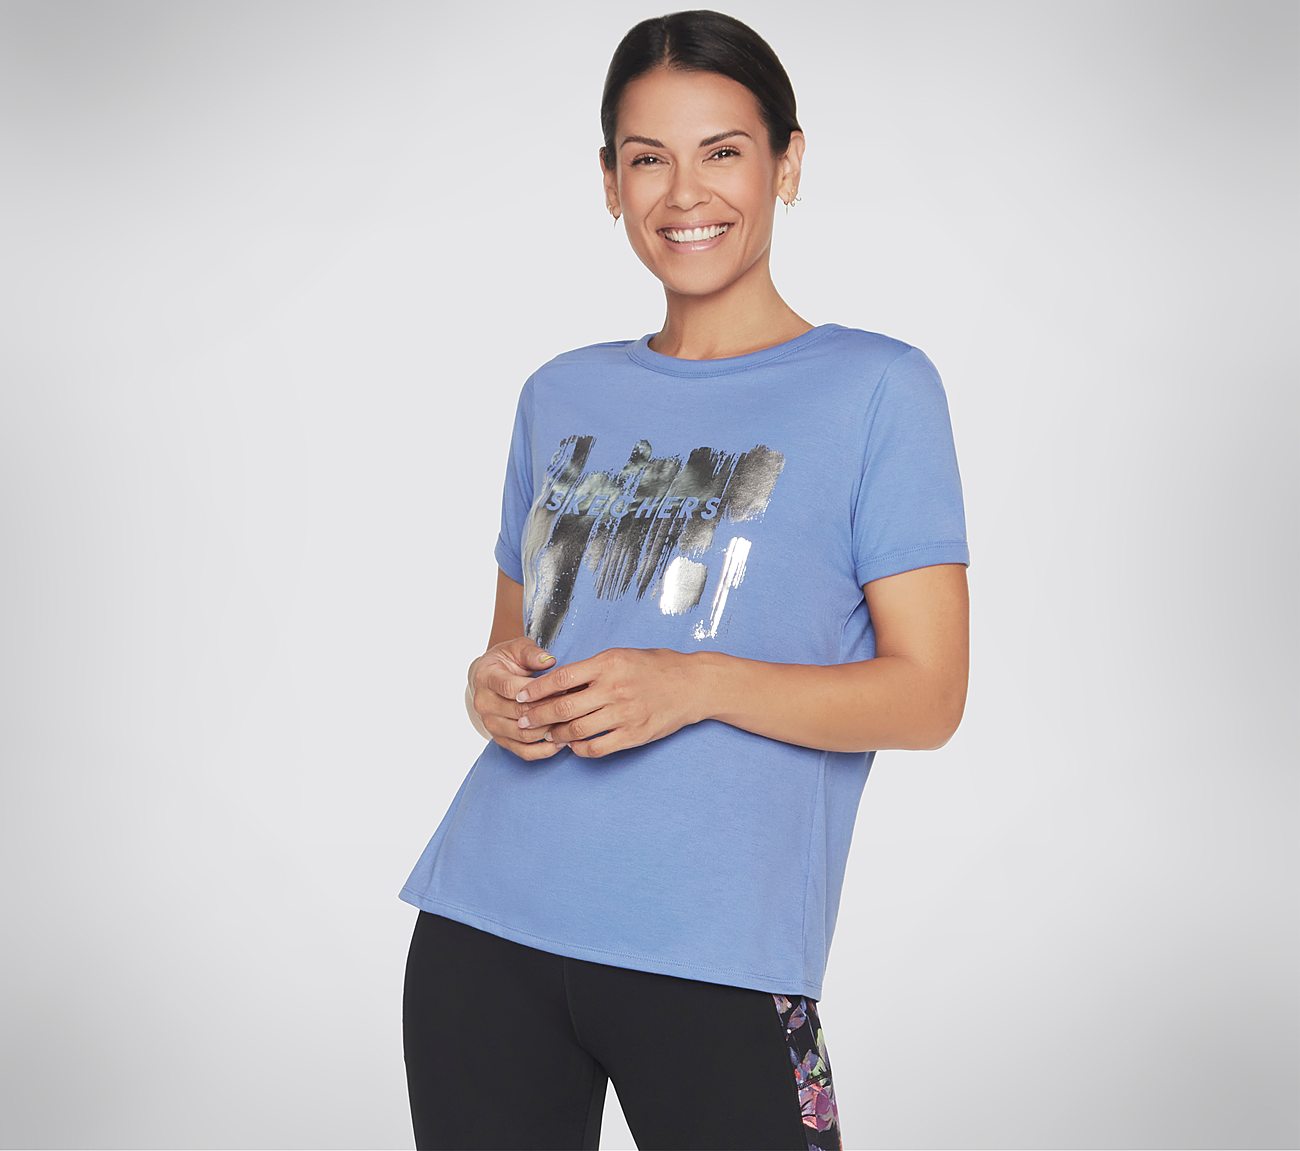 SKECHERS SHINE TEE, PERIWINKLE Apparel Lateral View